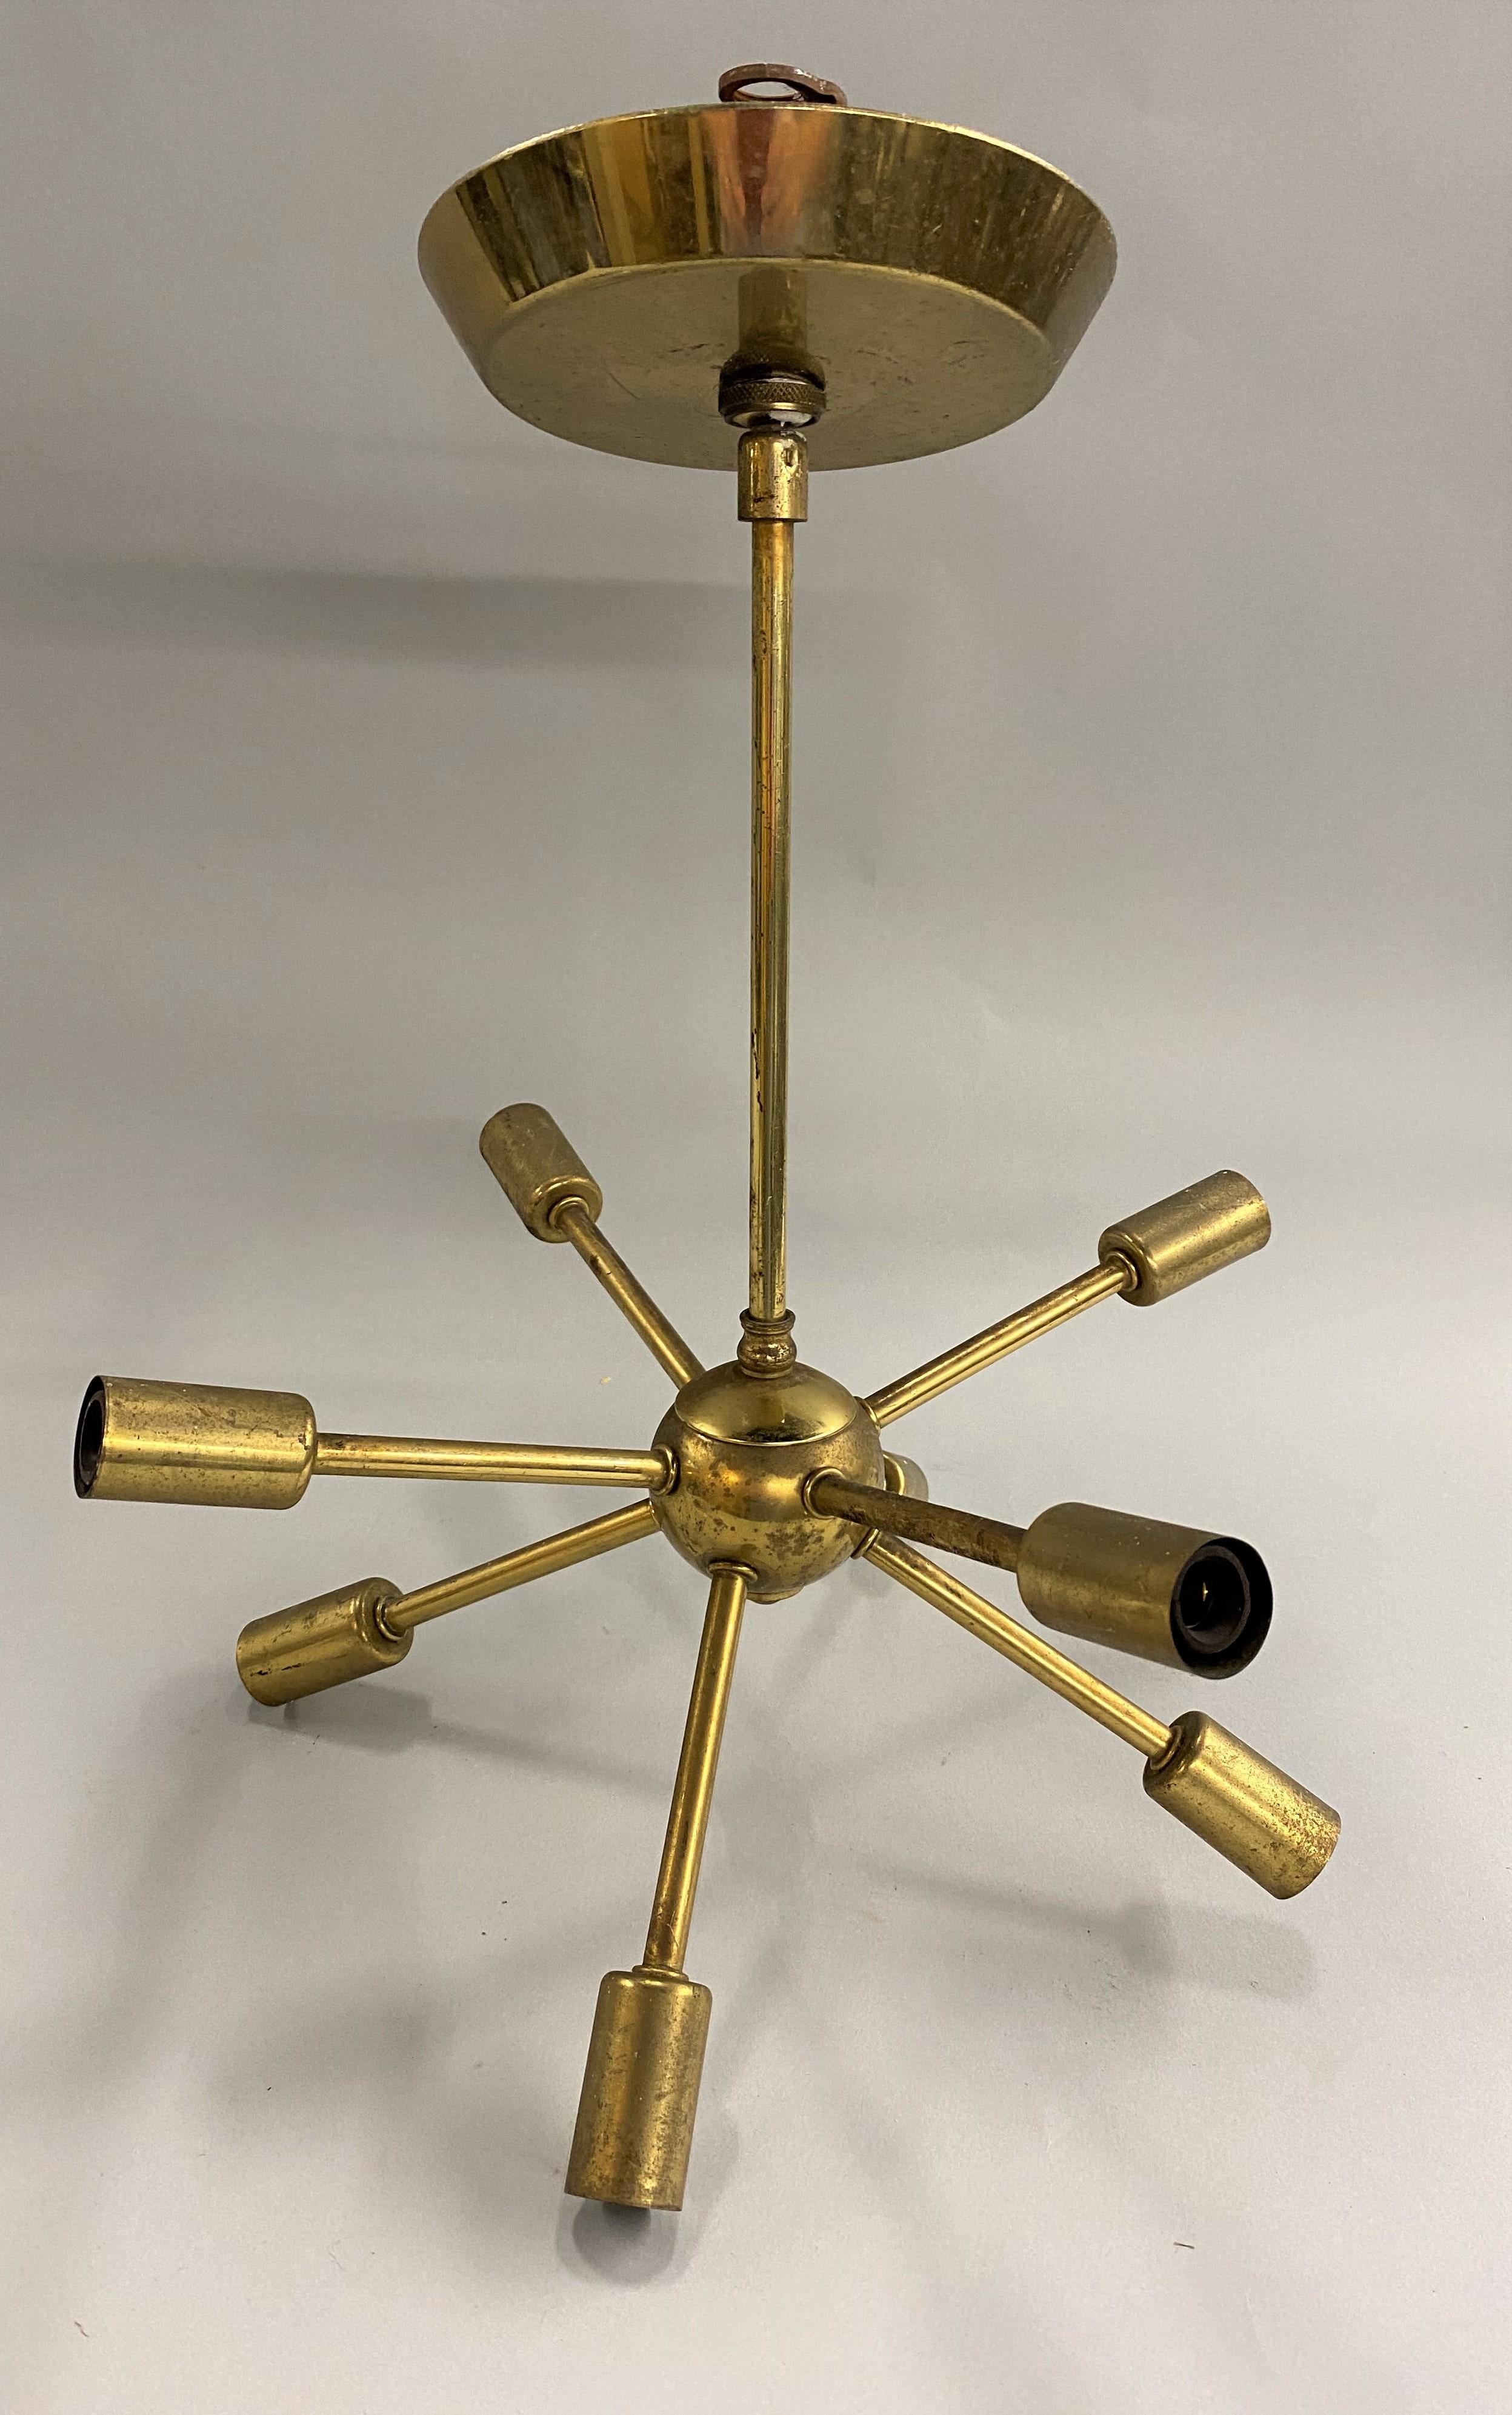 A fine midcentury Space Age design petite Sputnik 8-light brass chandelier with canopy. The first satellite that ever orbited the earth was the Soviet Union's Sputnik satellite, launched in 1957. Soon thereafter the launch inspired the creation of